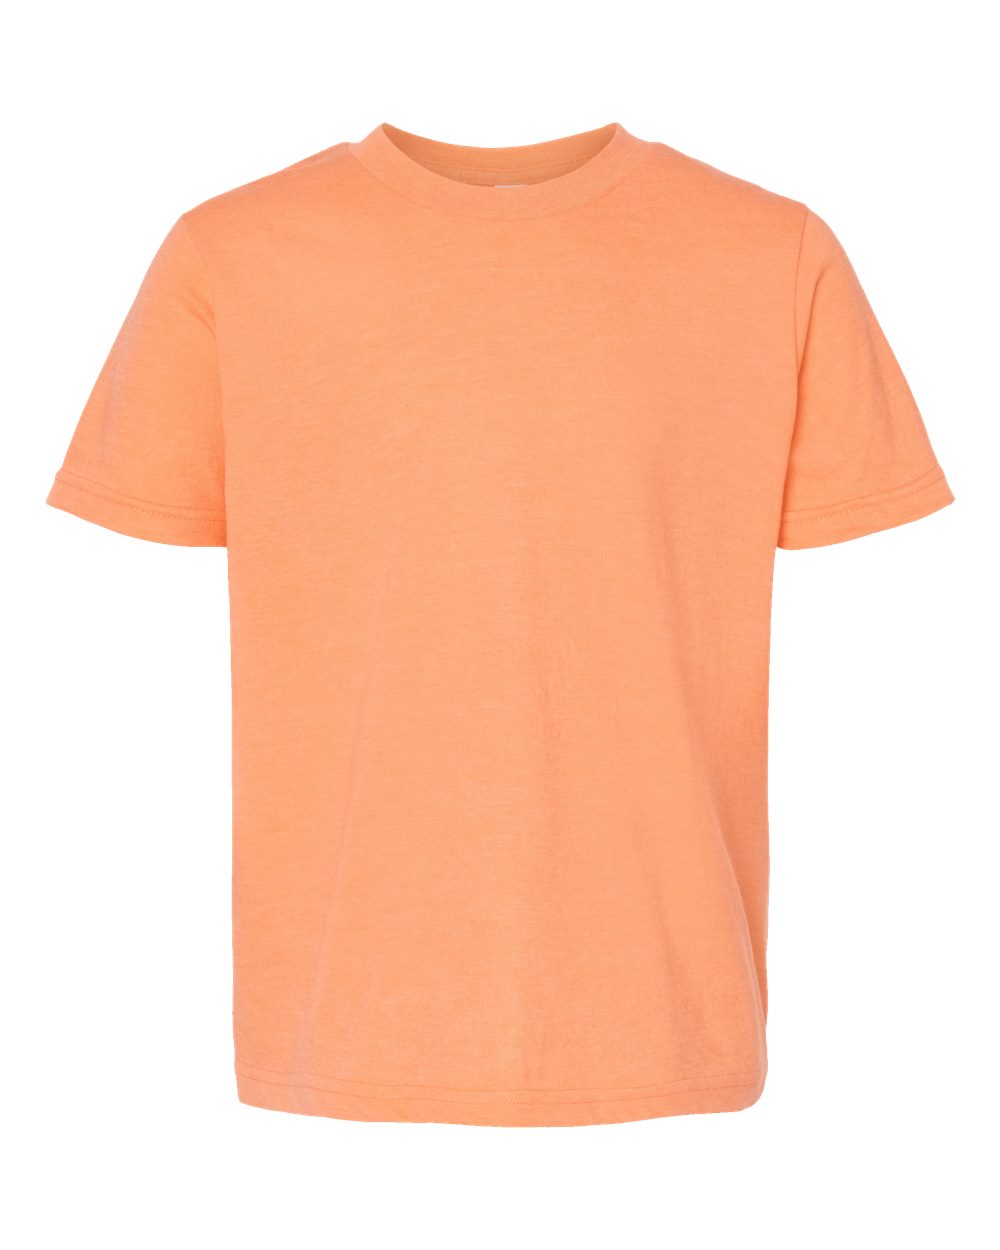 Tultex Youth Tee (235) in Heather Cantaloupe